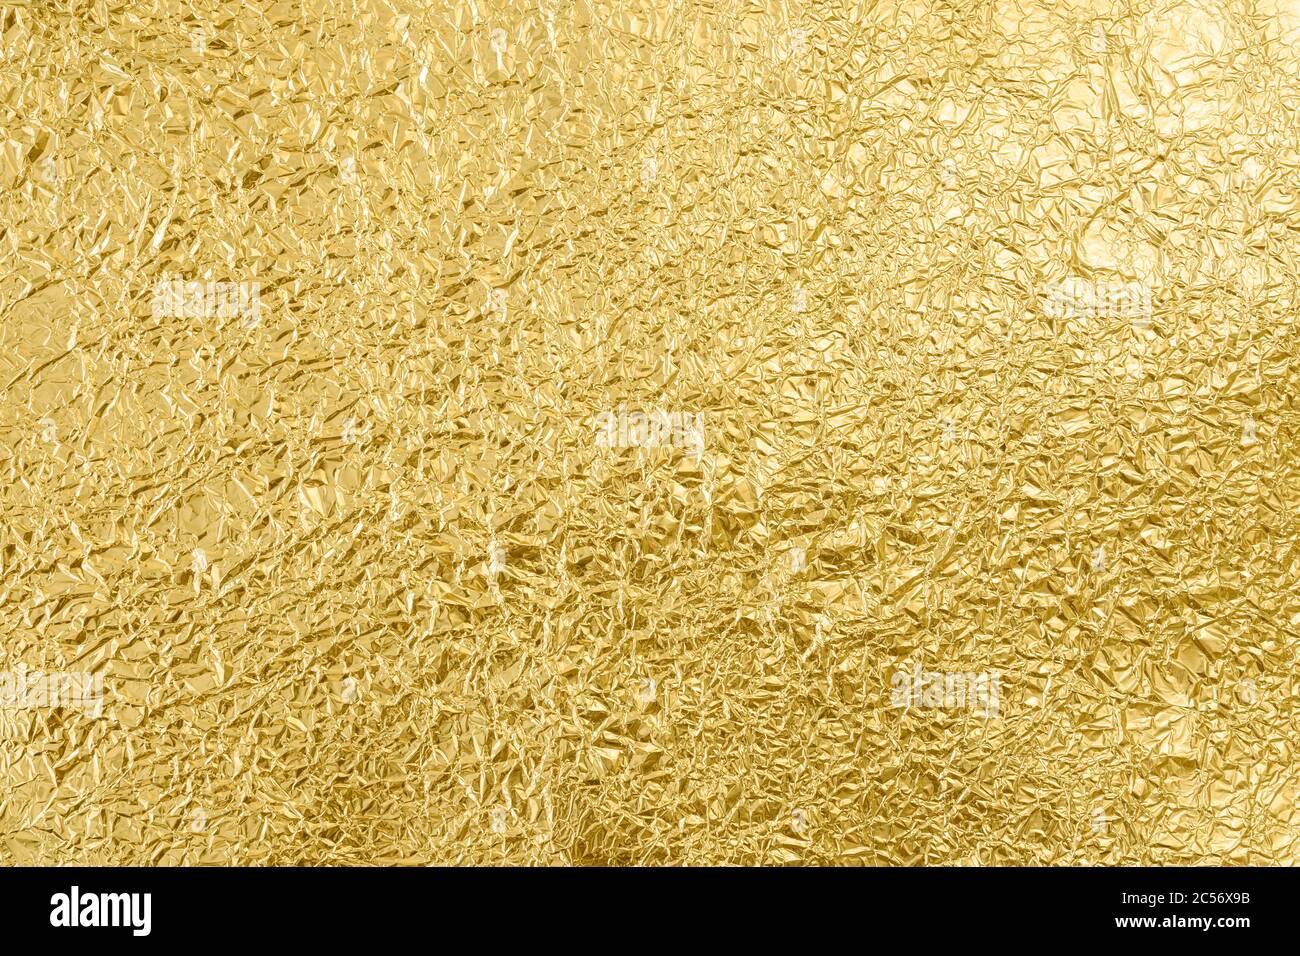 https://c8.alamy.com/comp/2C56X9B/crumpled-golden-tin-foil-surface-top-view-abstract-full-frame-textured-silvery-background-2C56X9B.jpg